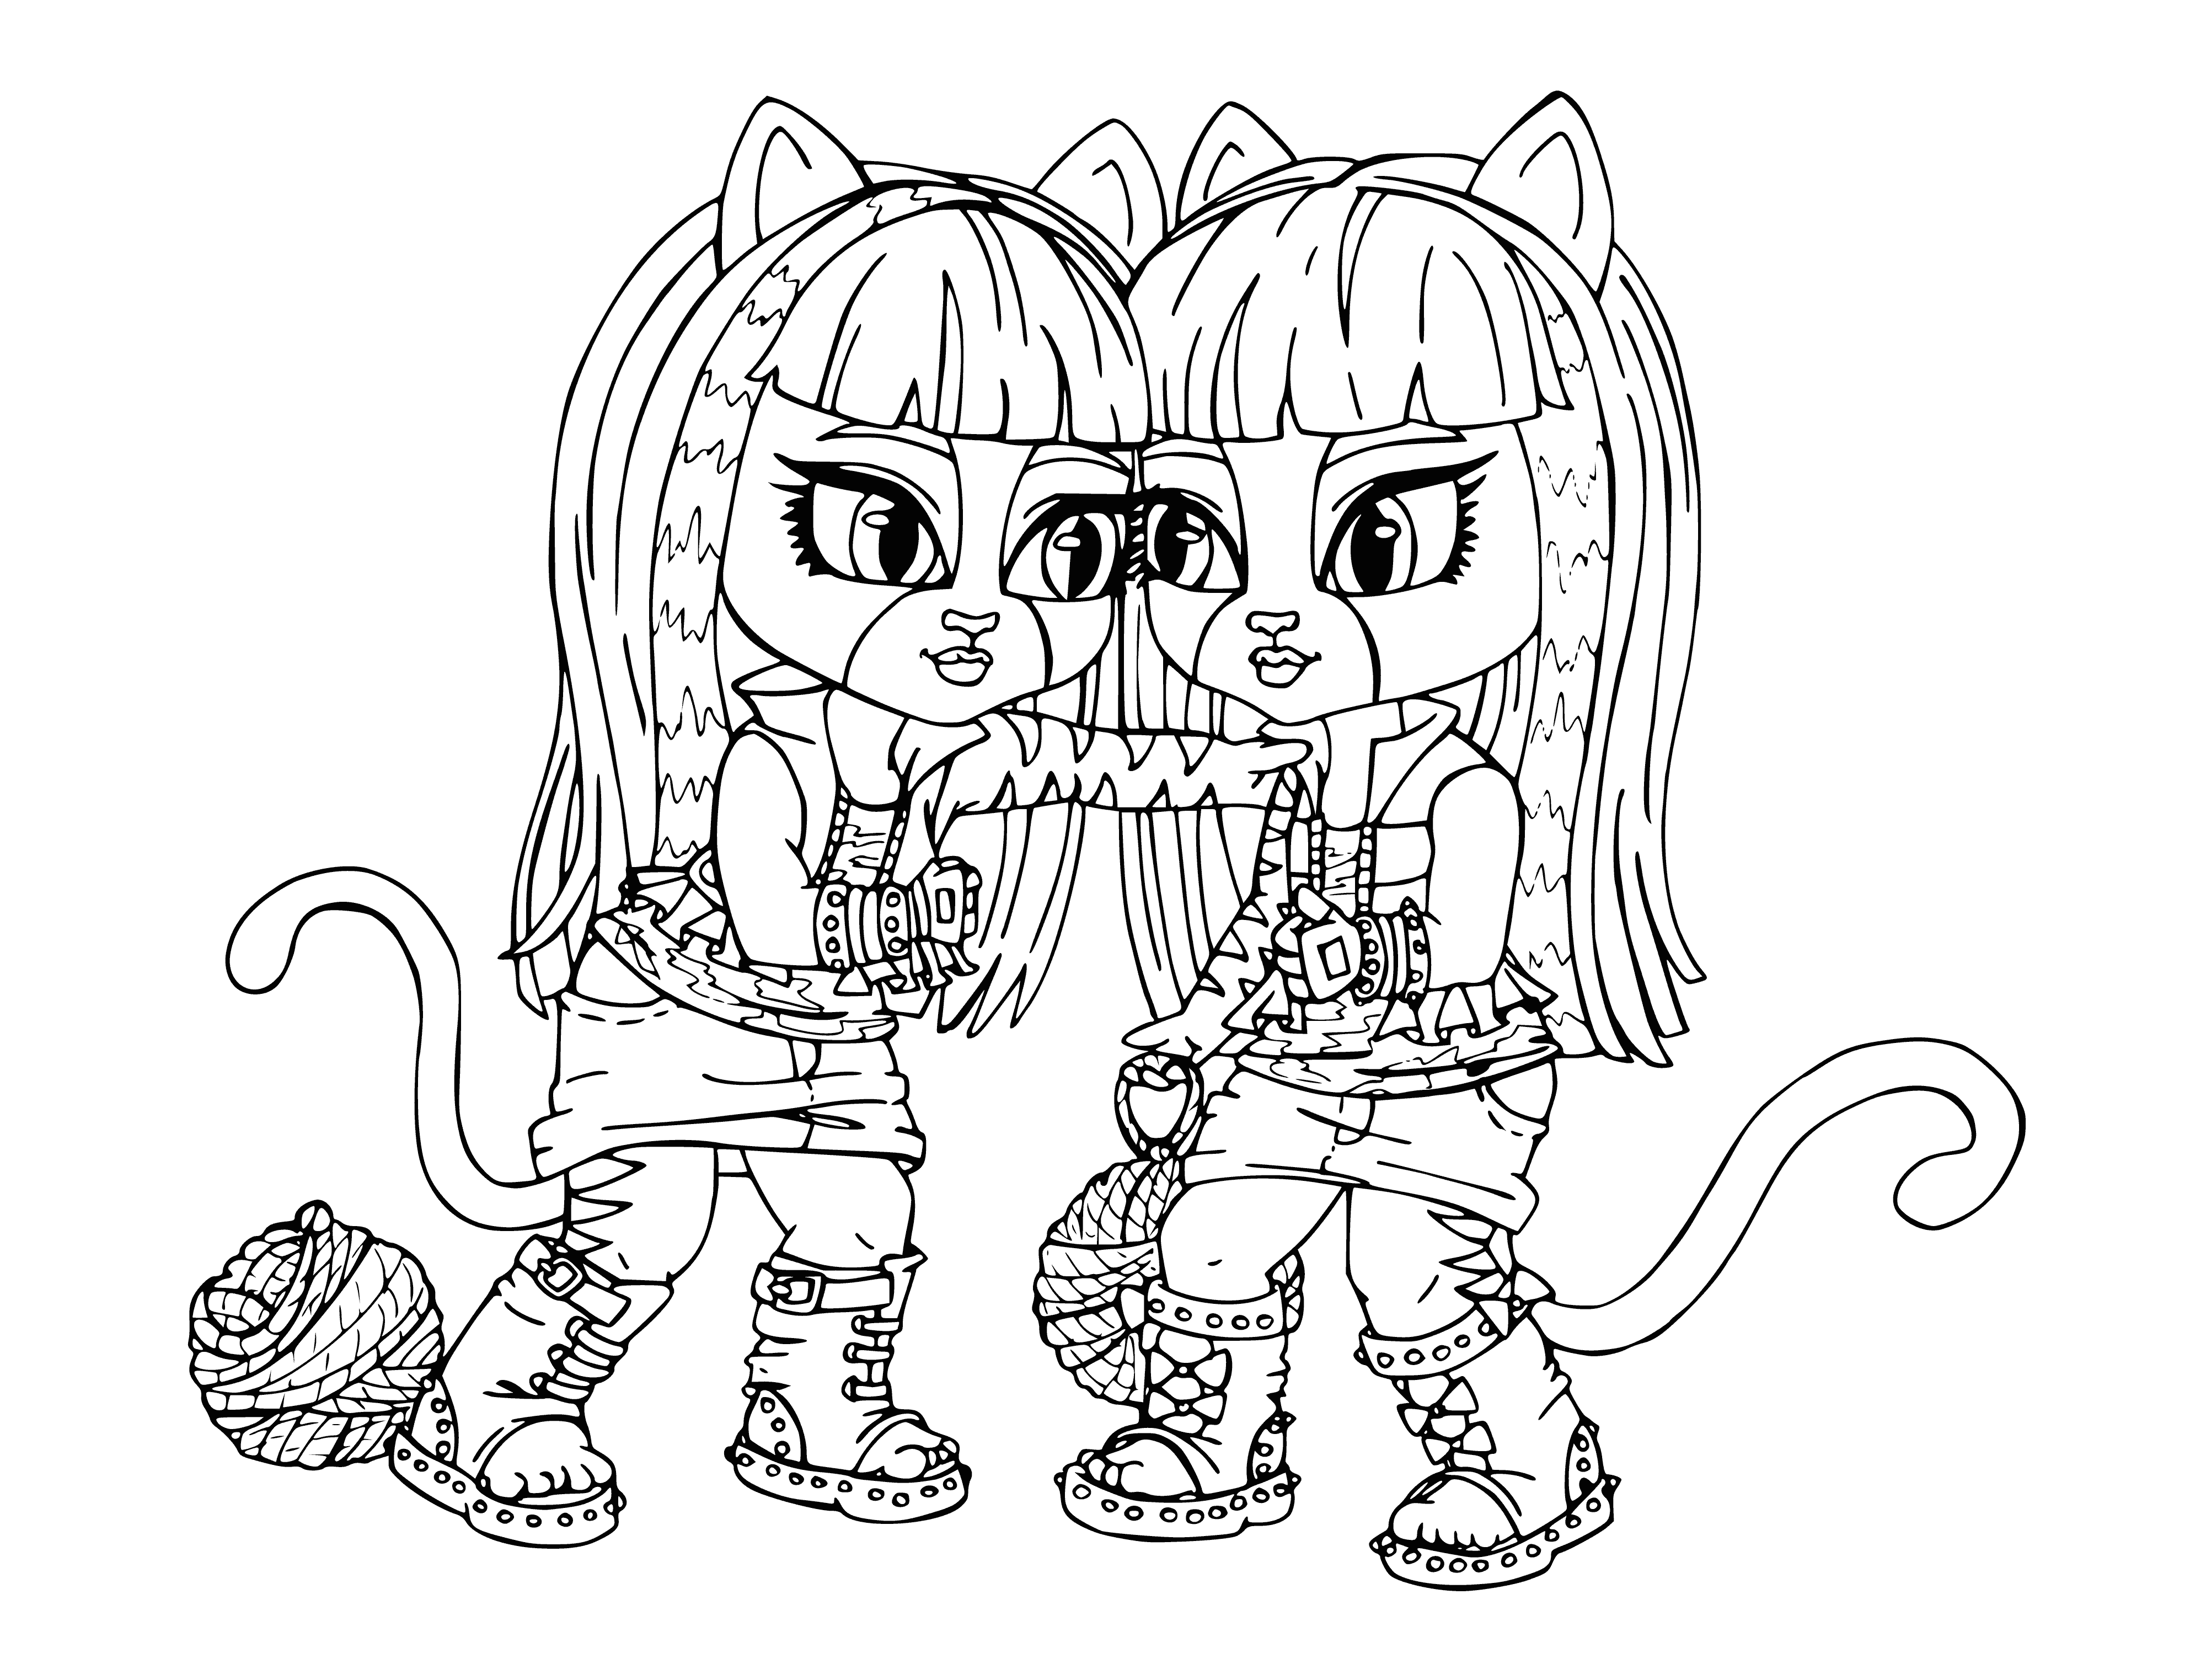 Meaulodia and Pursephone coloring page